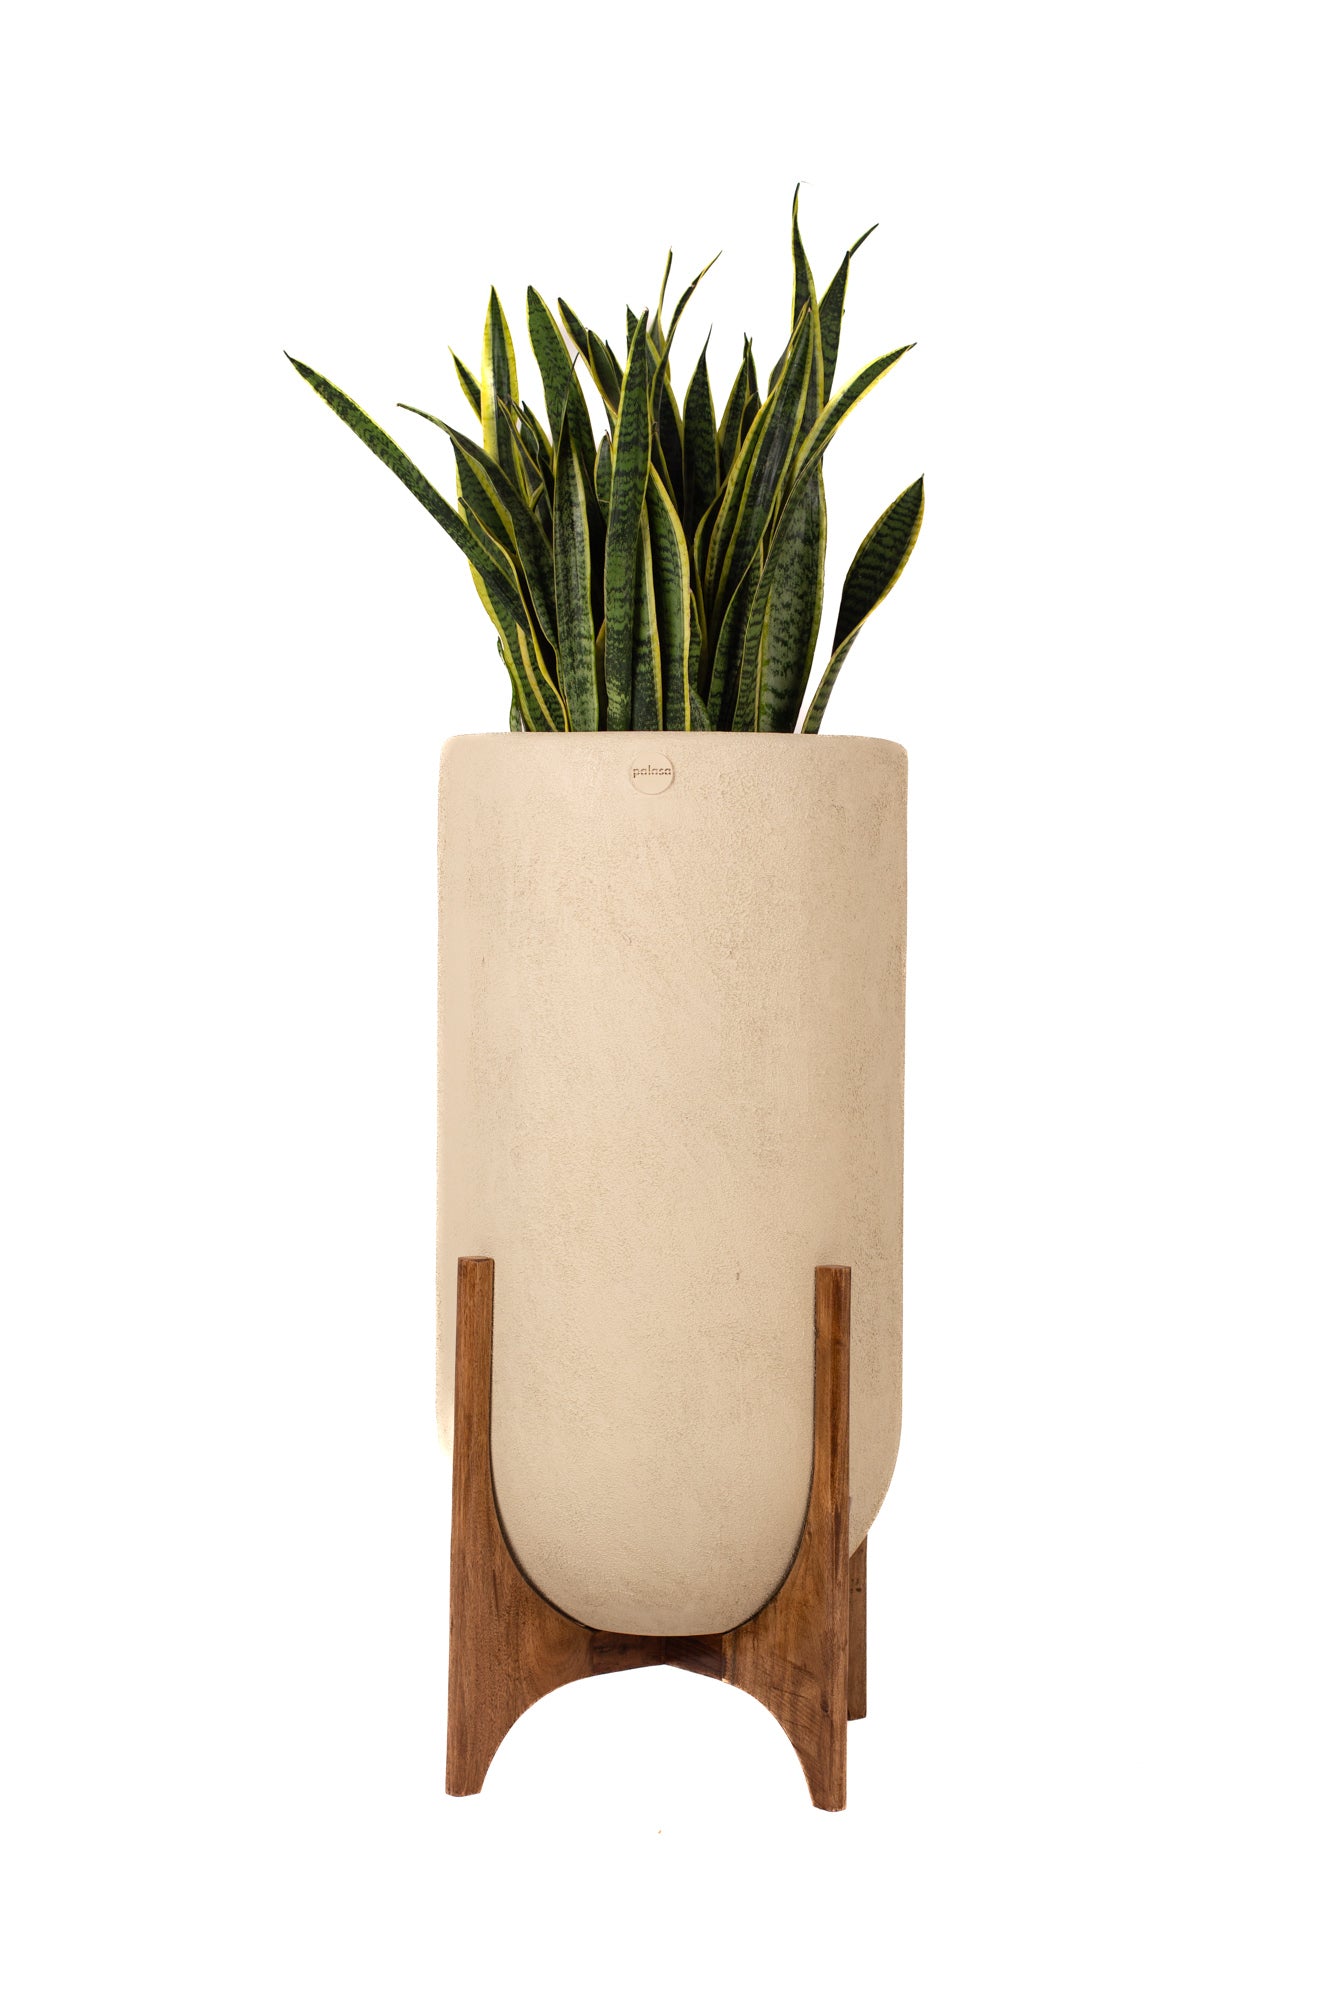 An Ode to the mid century designs with the beige Ammo Planter with Woods stand. This Beige FRP Planter is a perfect planter to place indoors. Shop online for FRP Planter Pots.